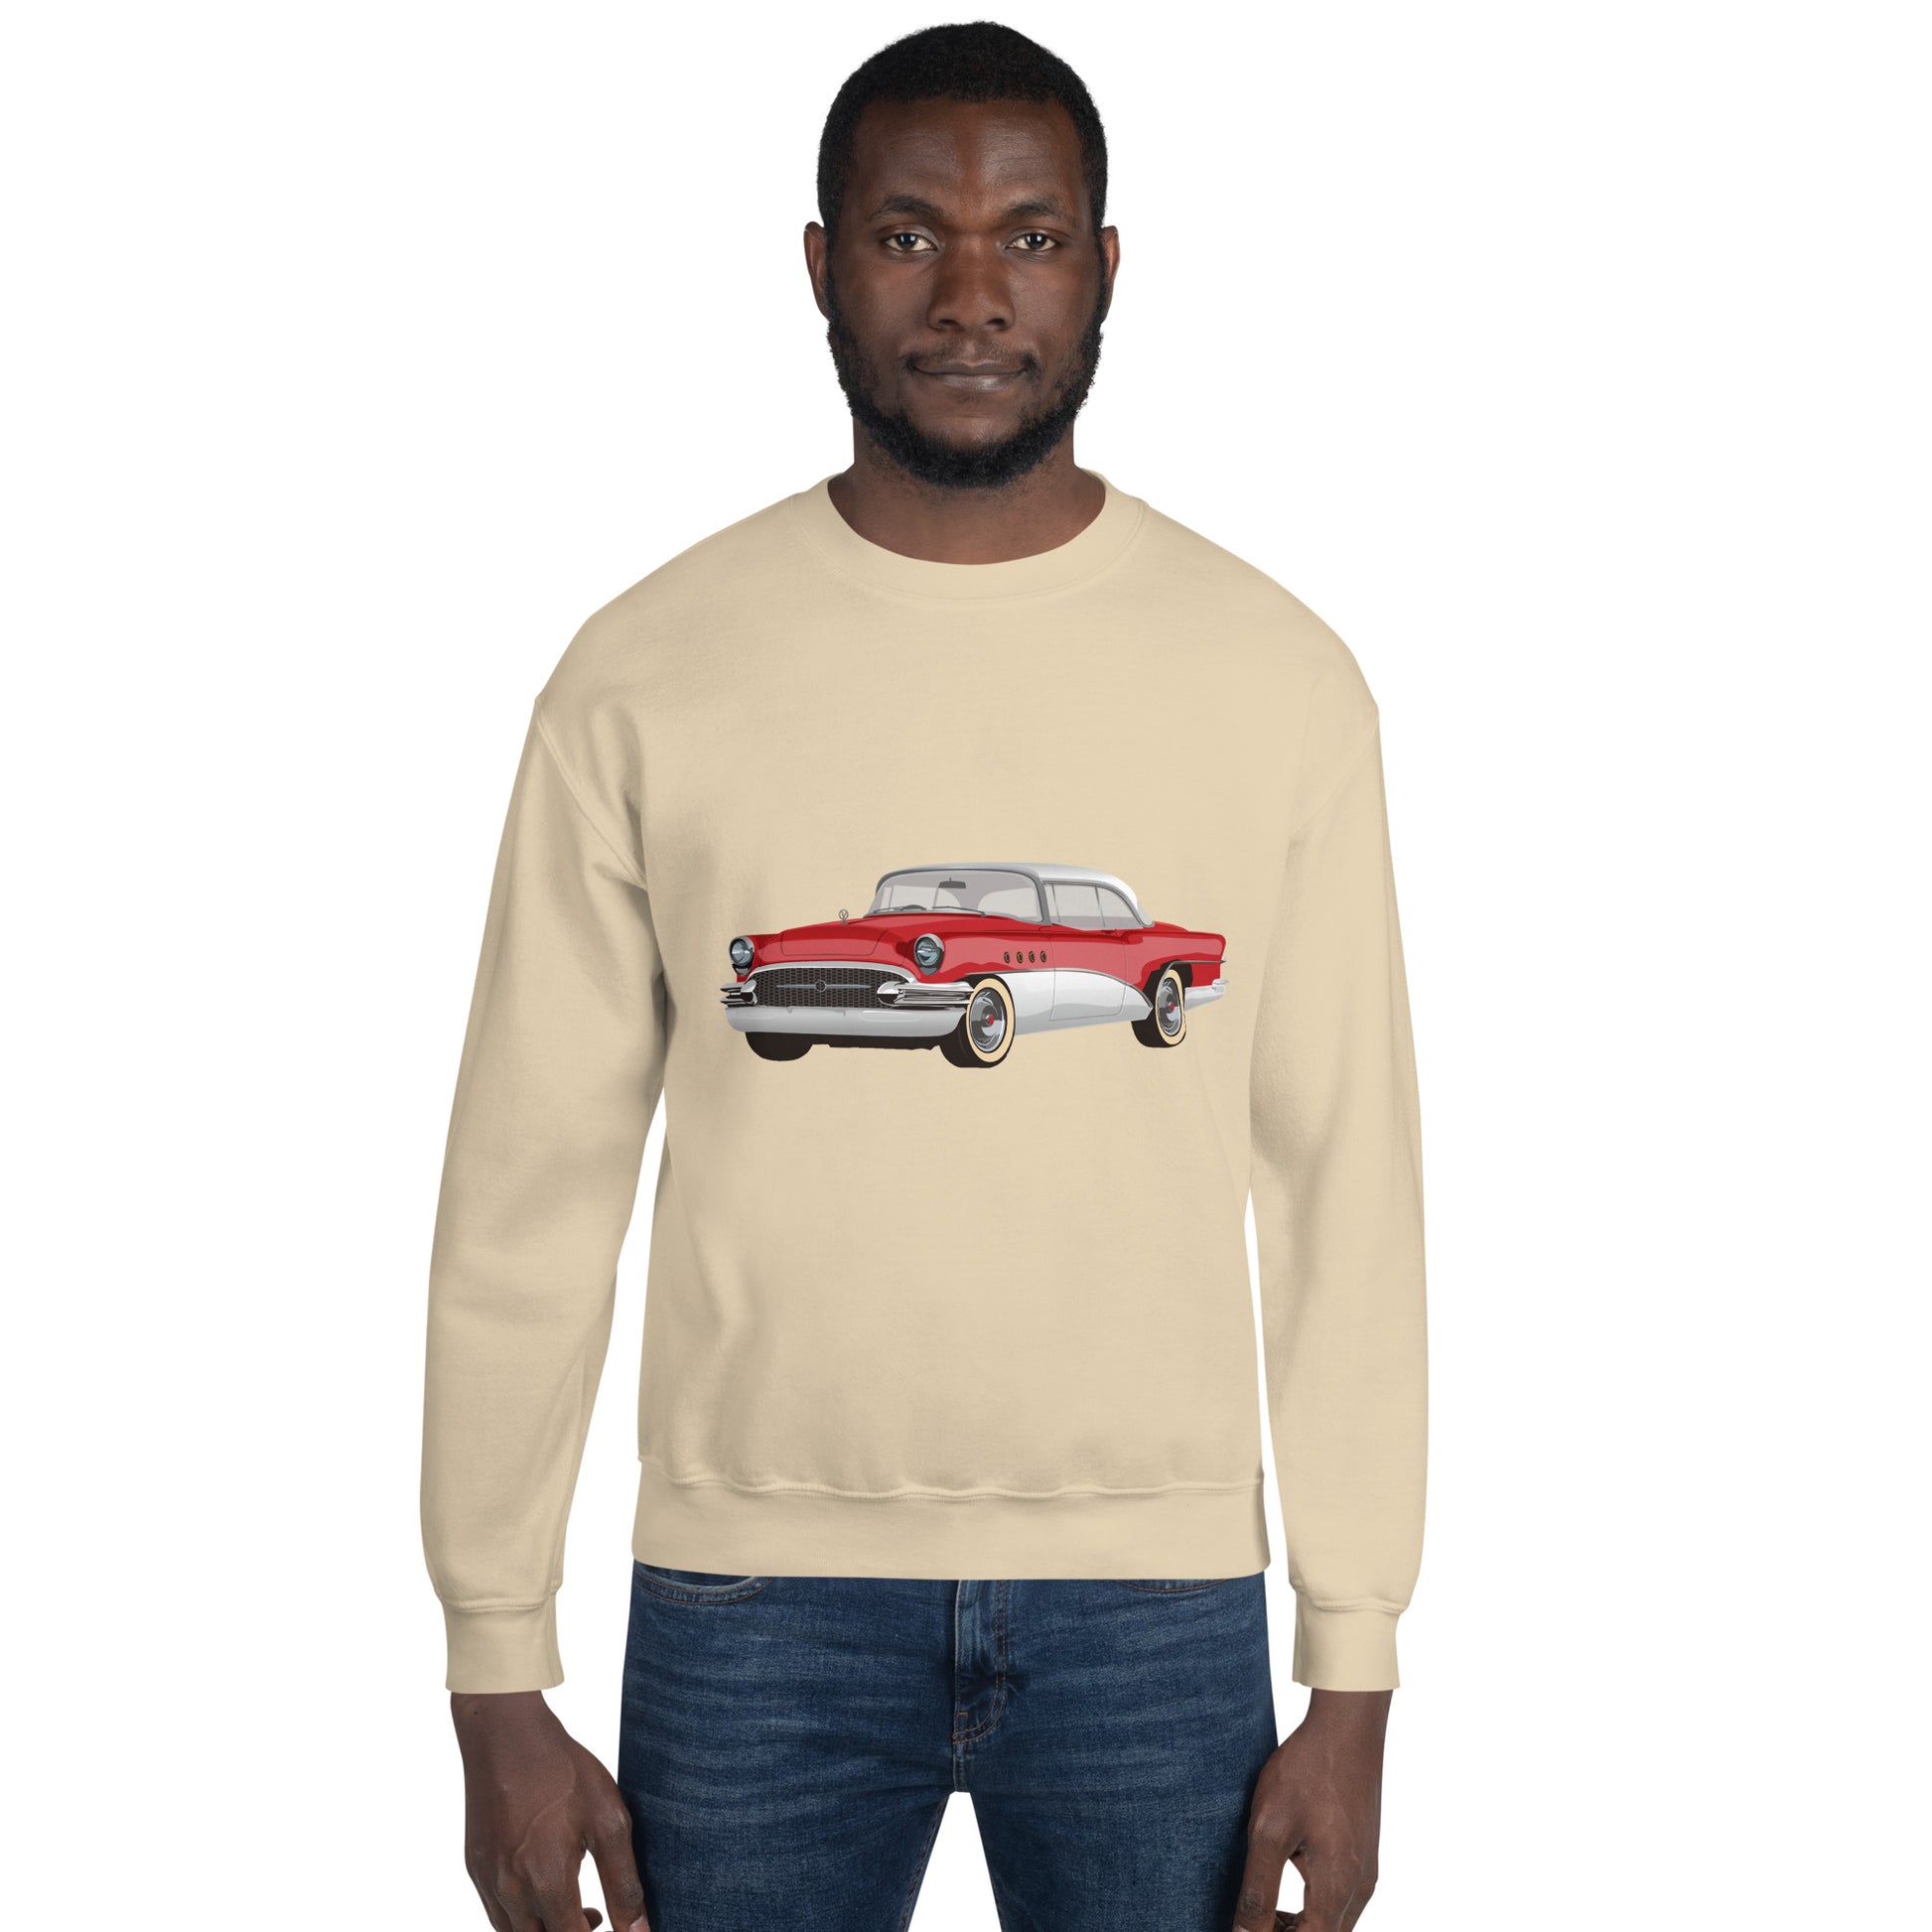 Man with sand sweatshirt with red chevrolet